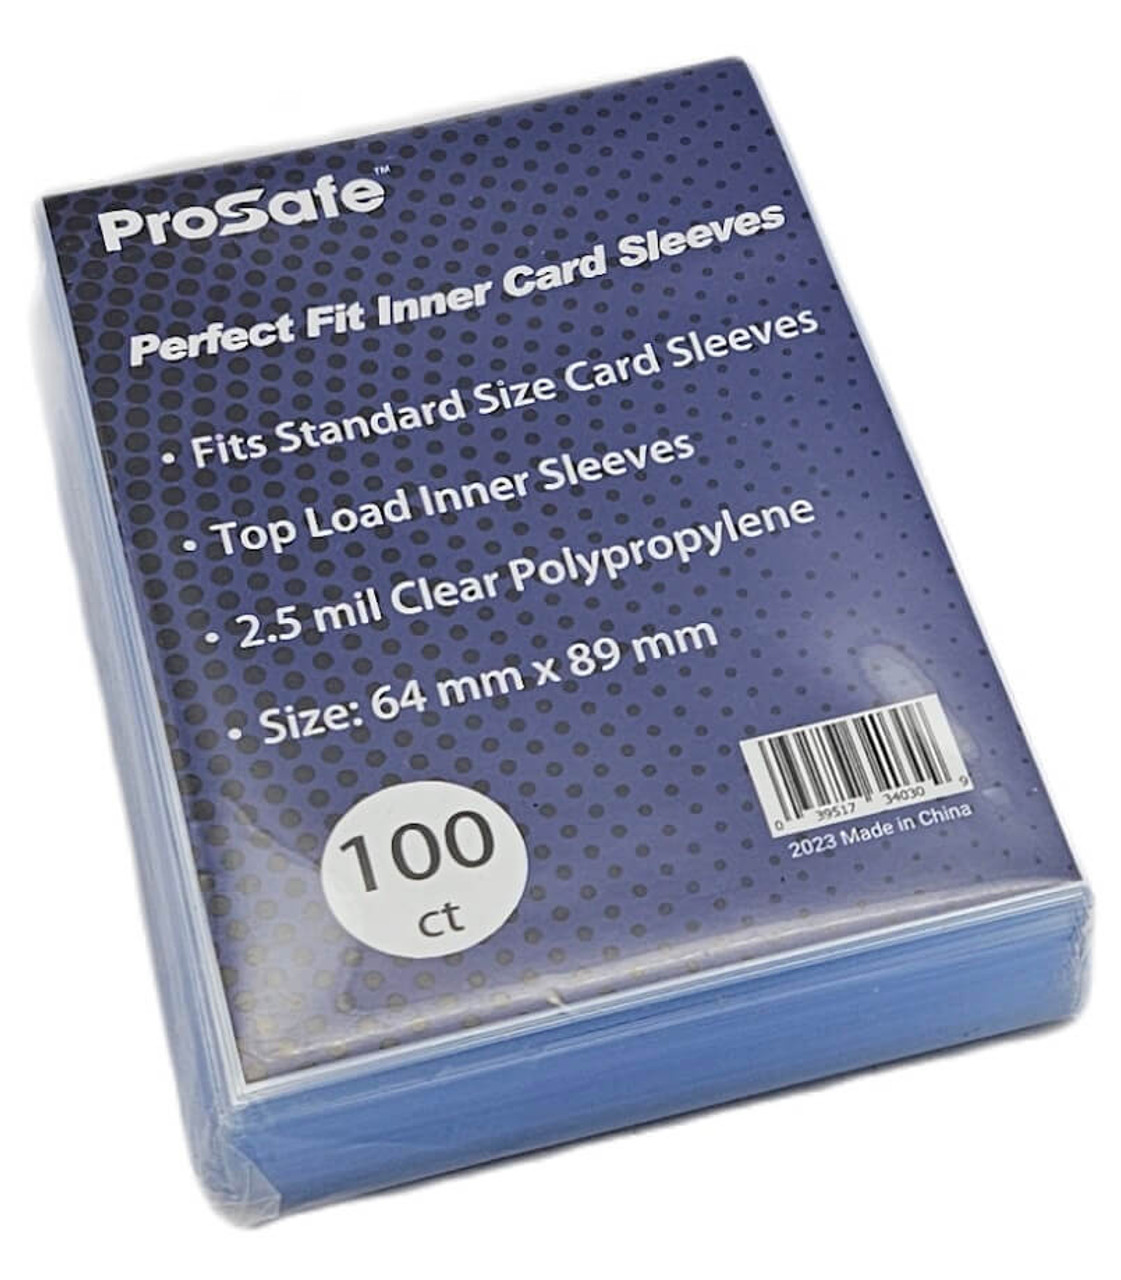 Pro-Safe Perfect Fit Inner Card Sleeves (100 Count Pack)